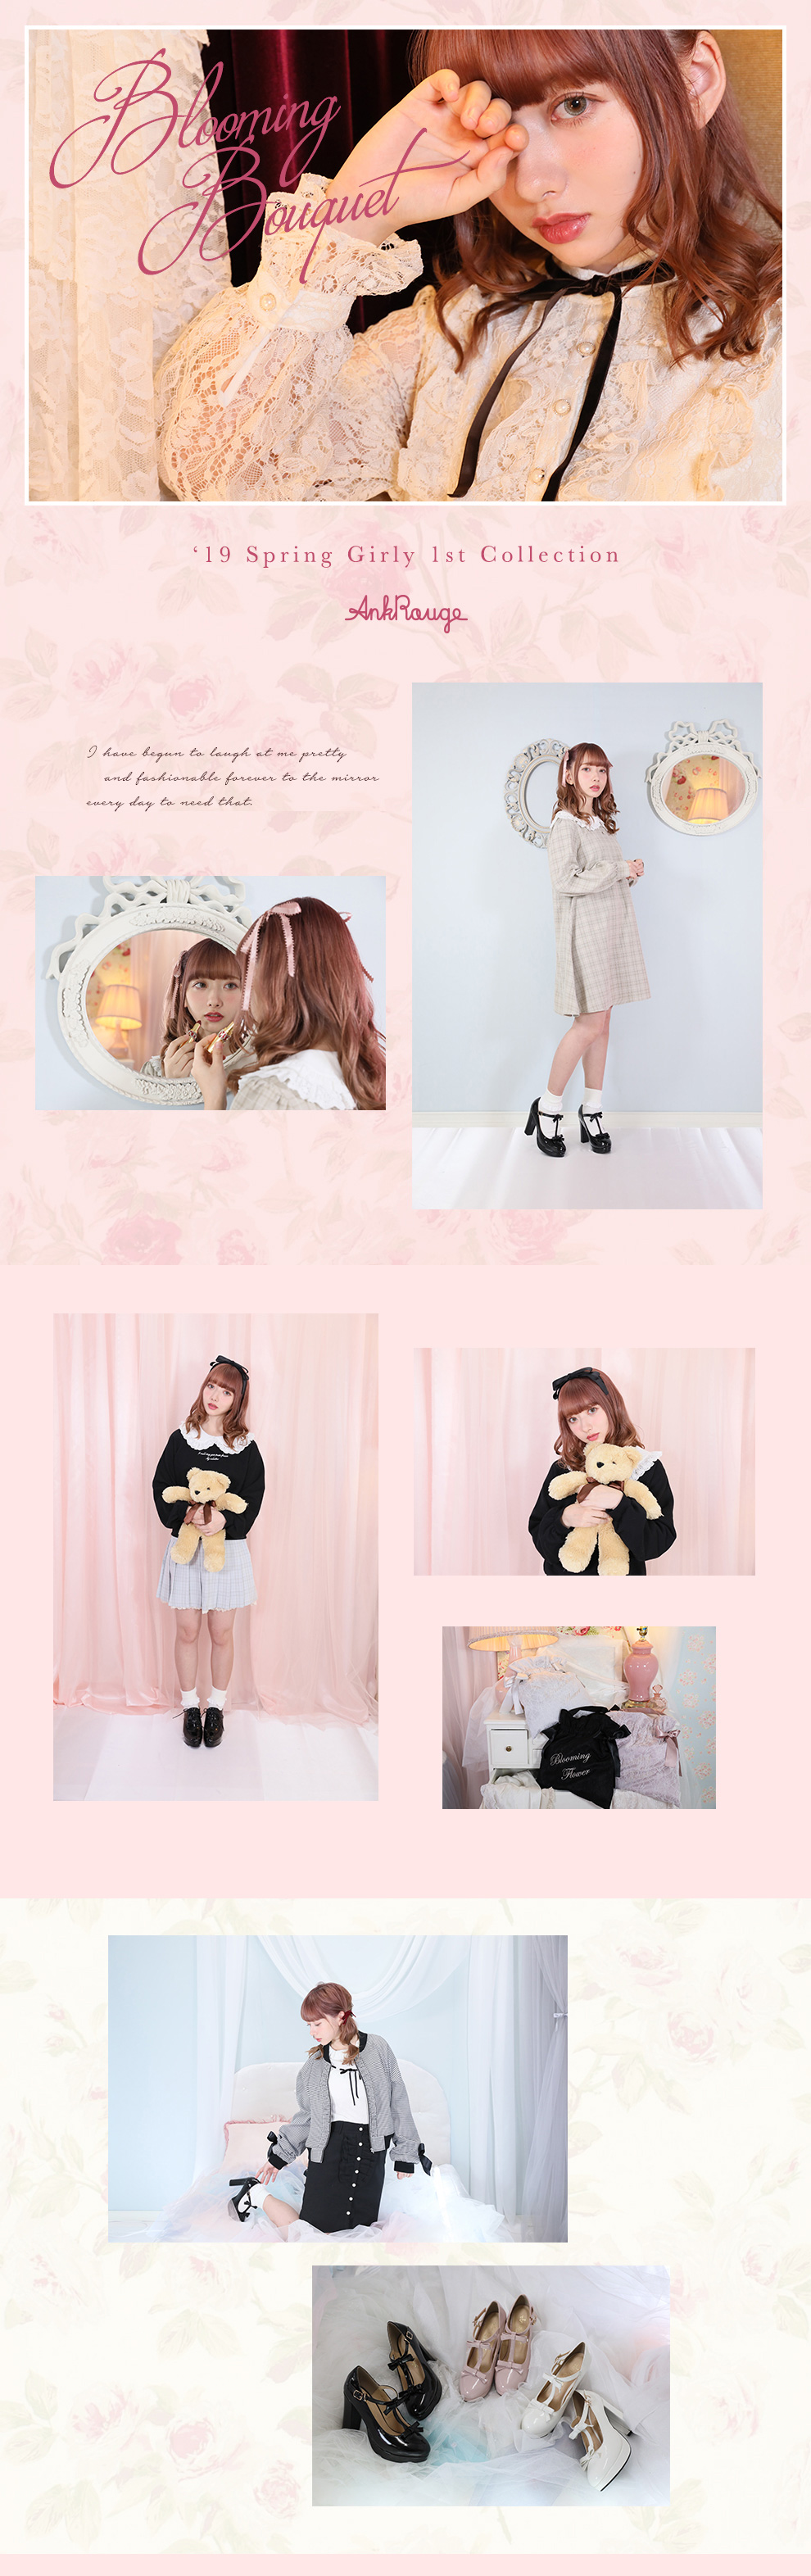 19 Spring Girly 1st Collection